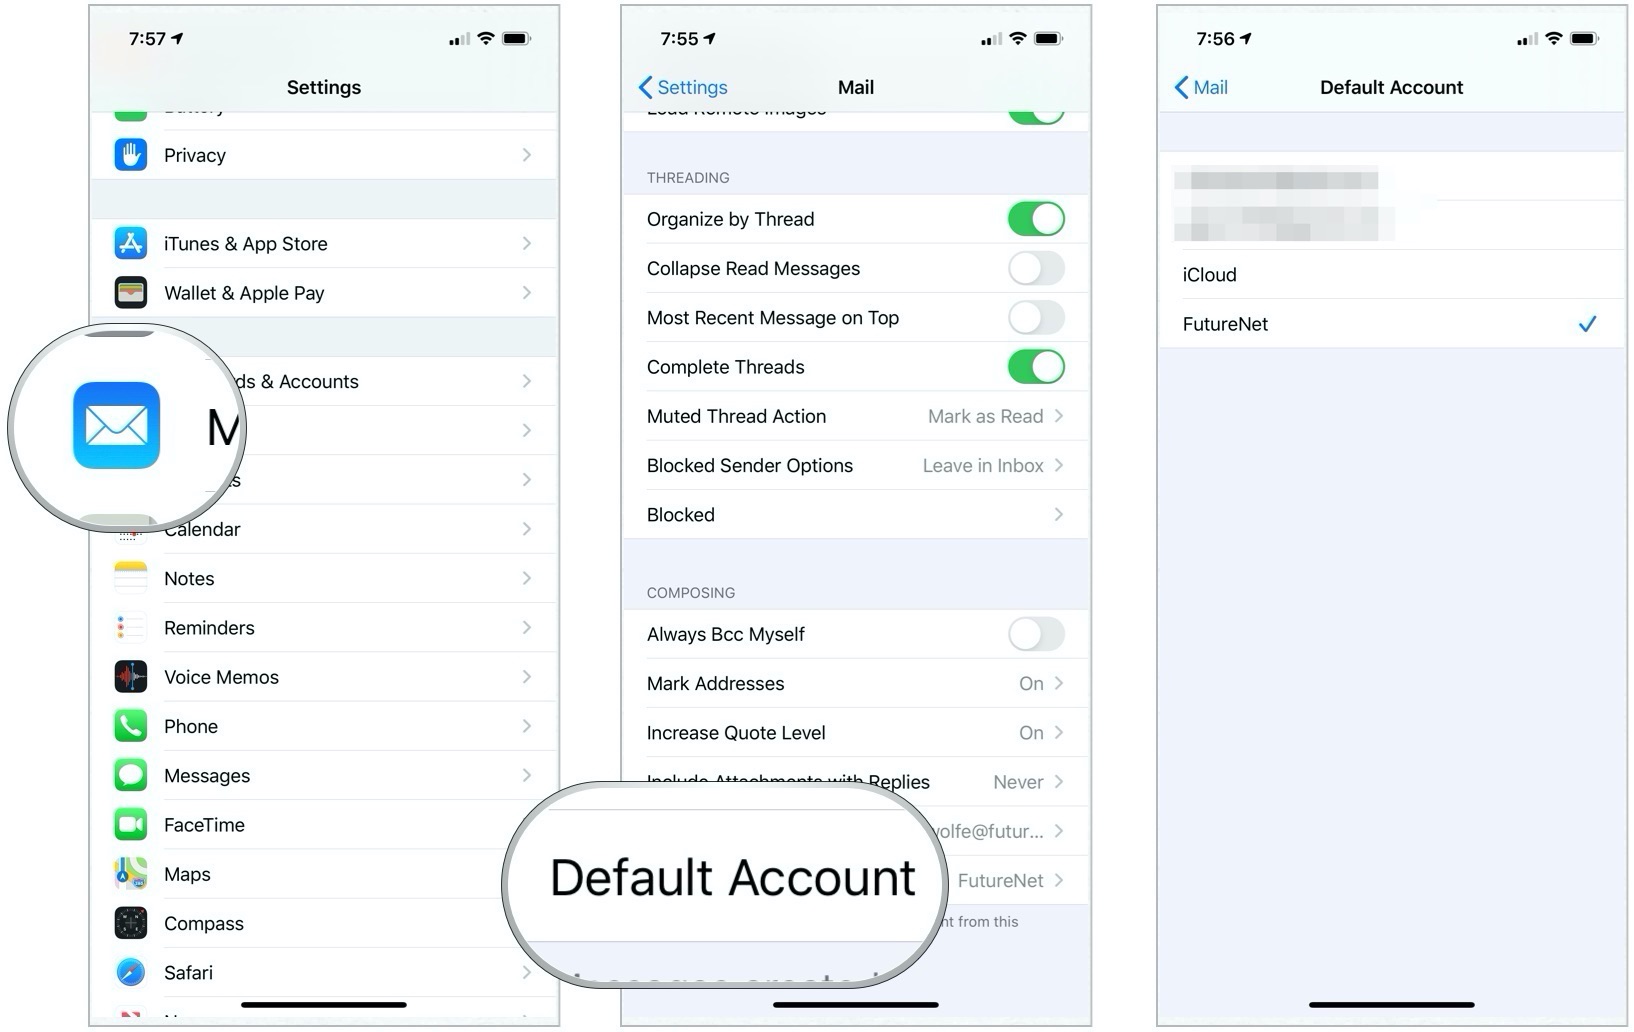 Launch the Settings app, tap Mail, scroll and tap Default Account, then tap the account to use